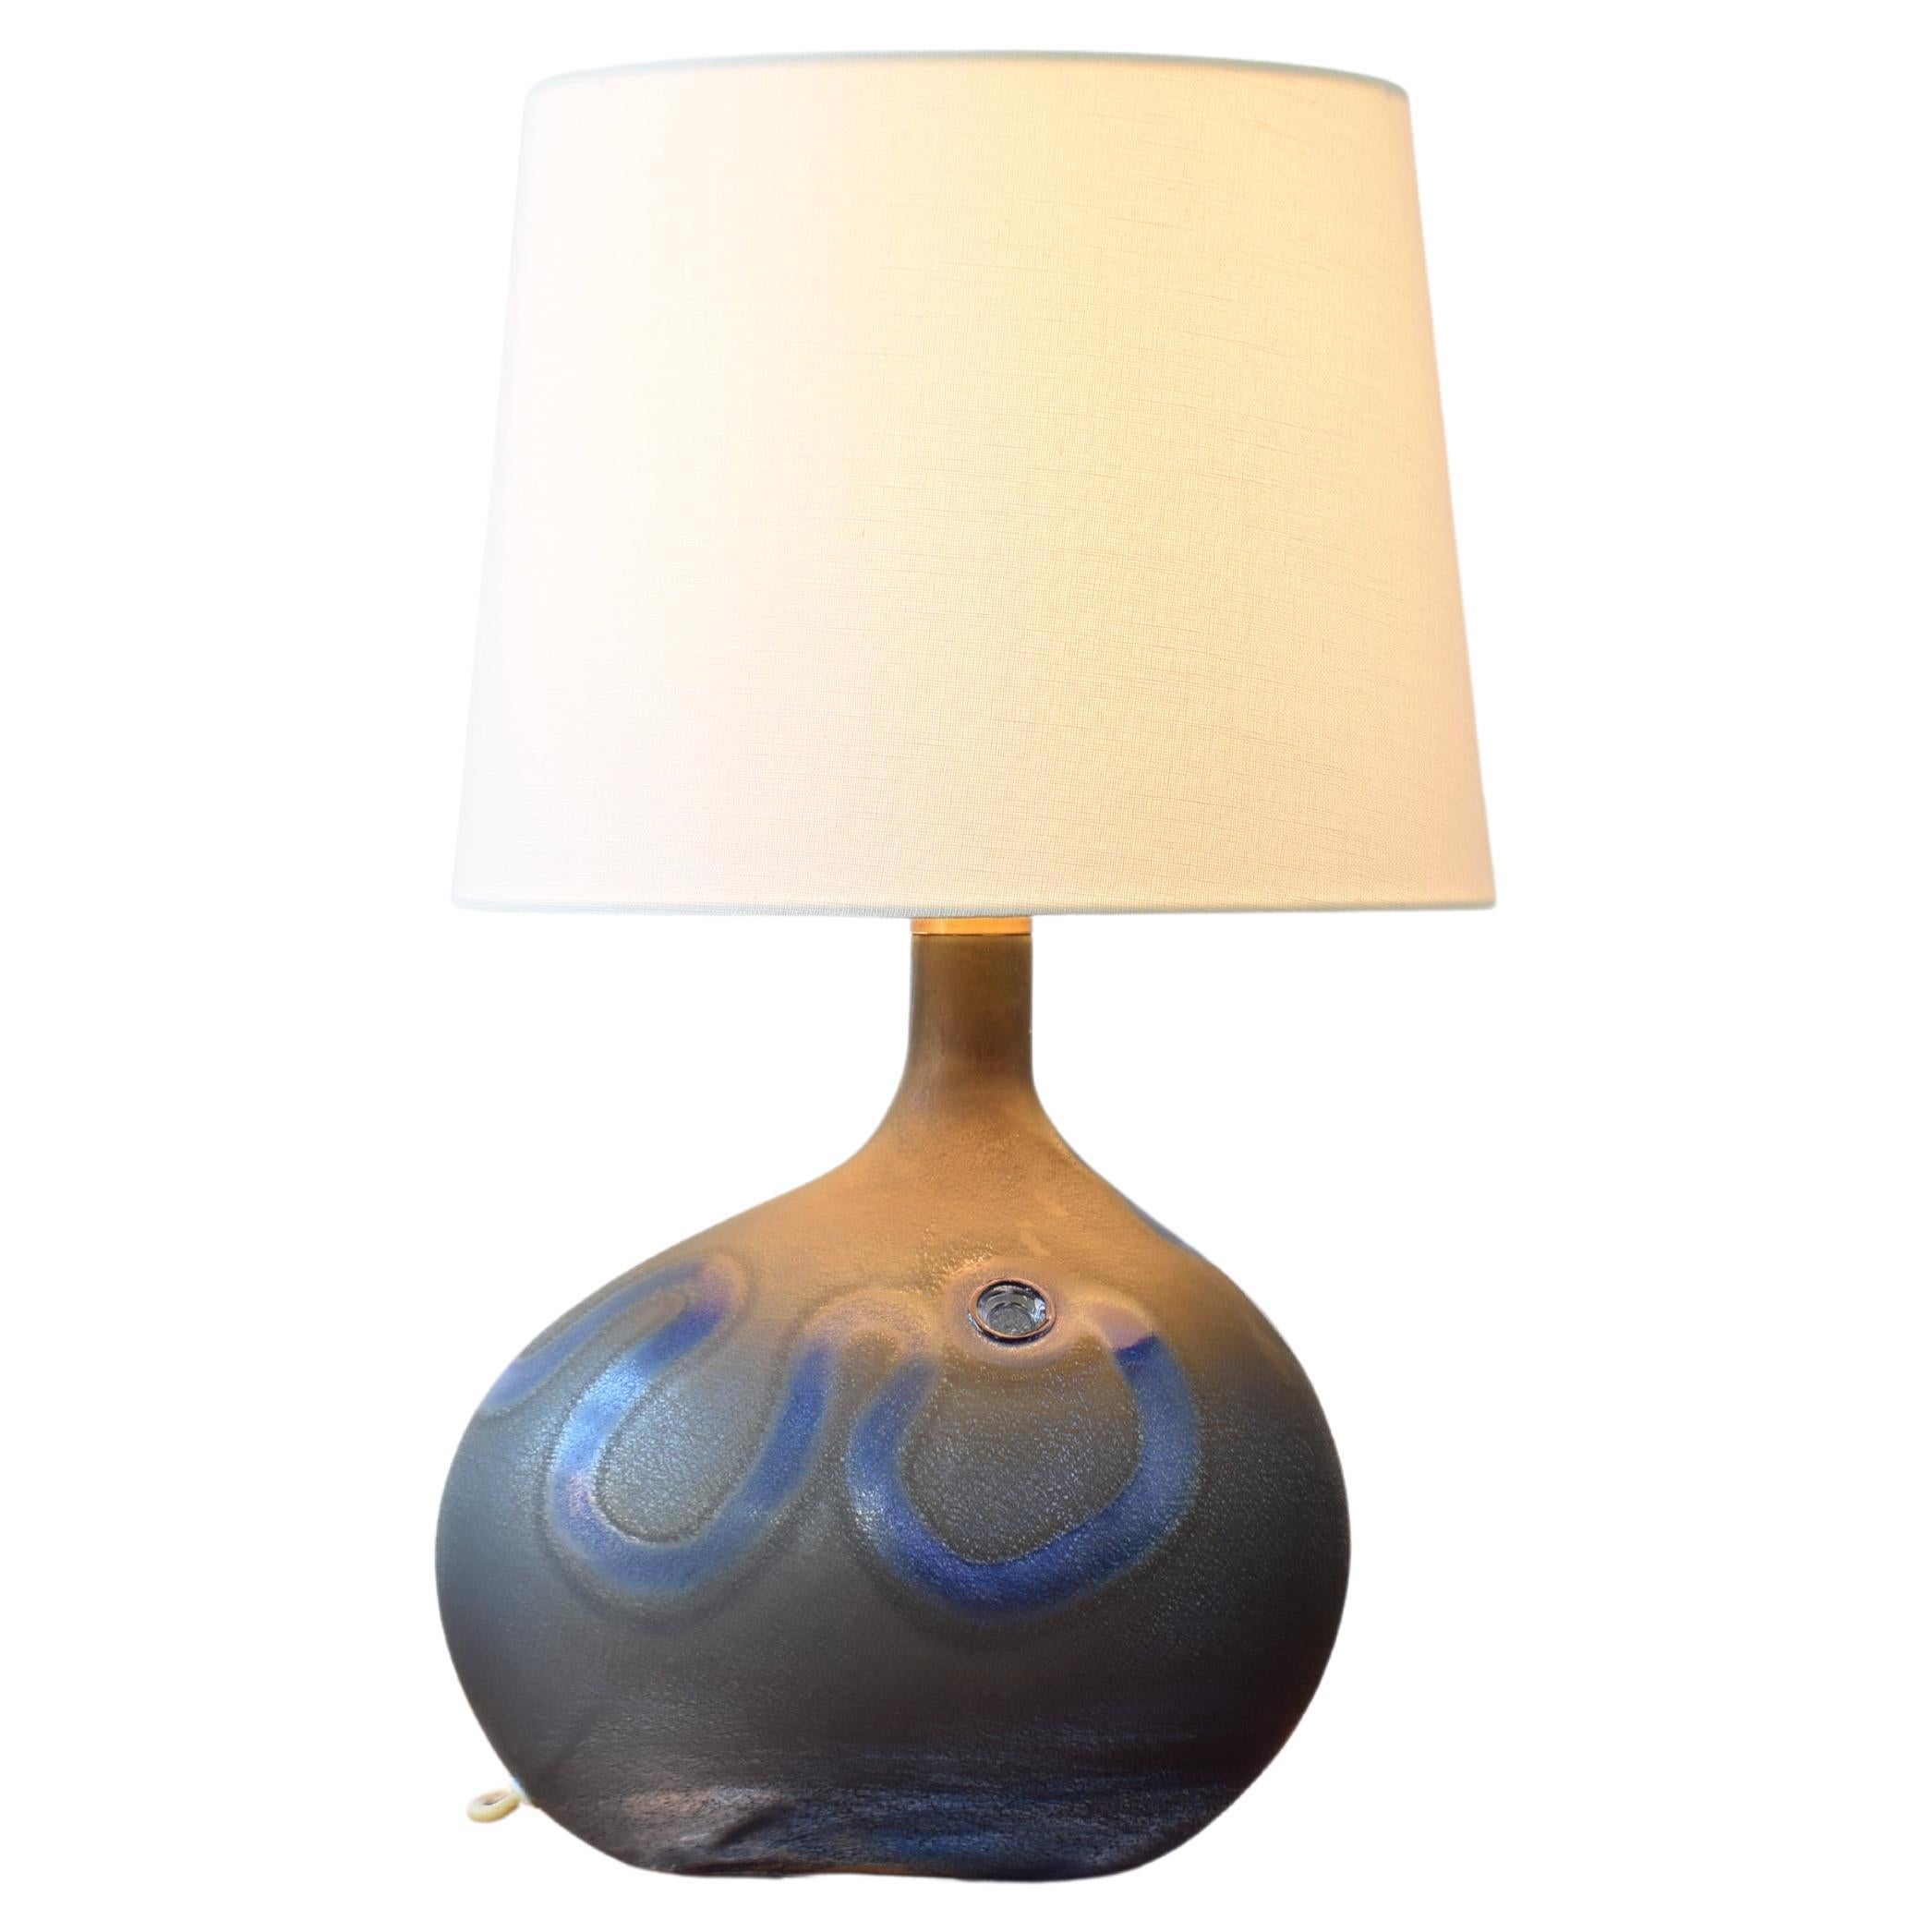 Michael Bang for Holmegaard Large Midnight Blue Sculptural Glass Table Lamp 1970 For Sale